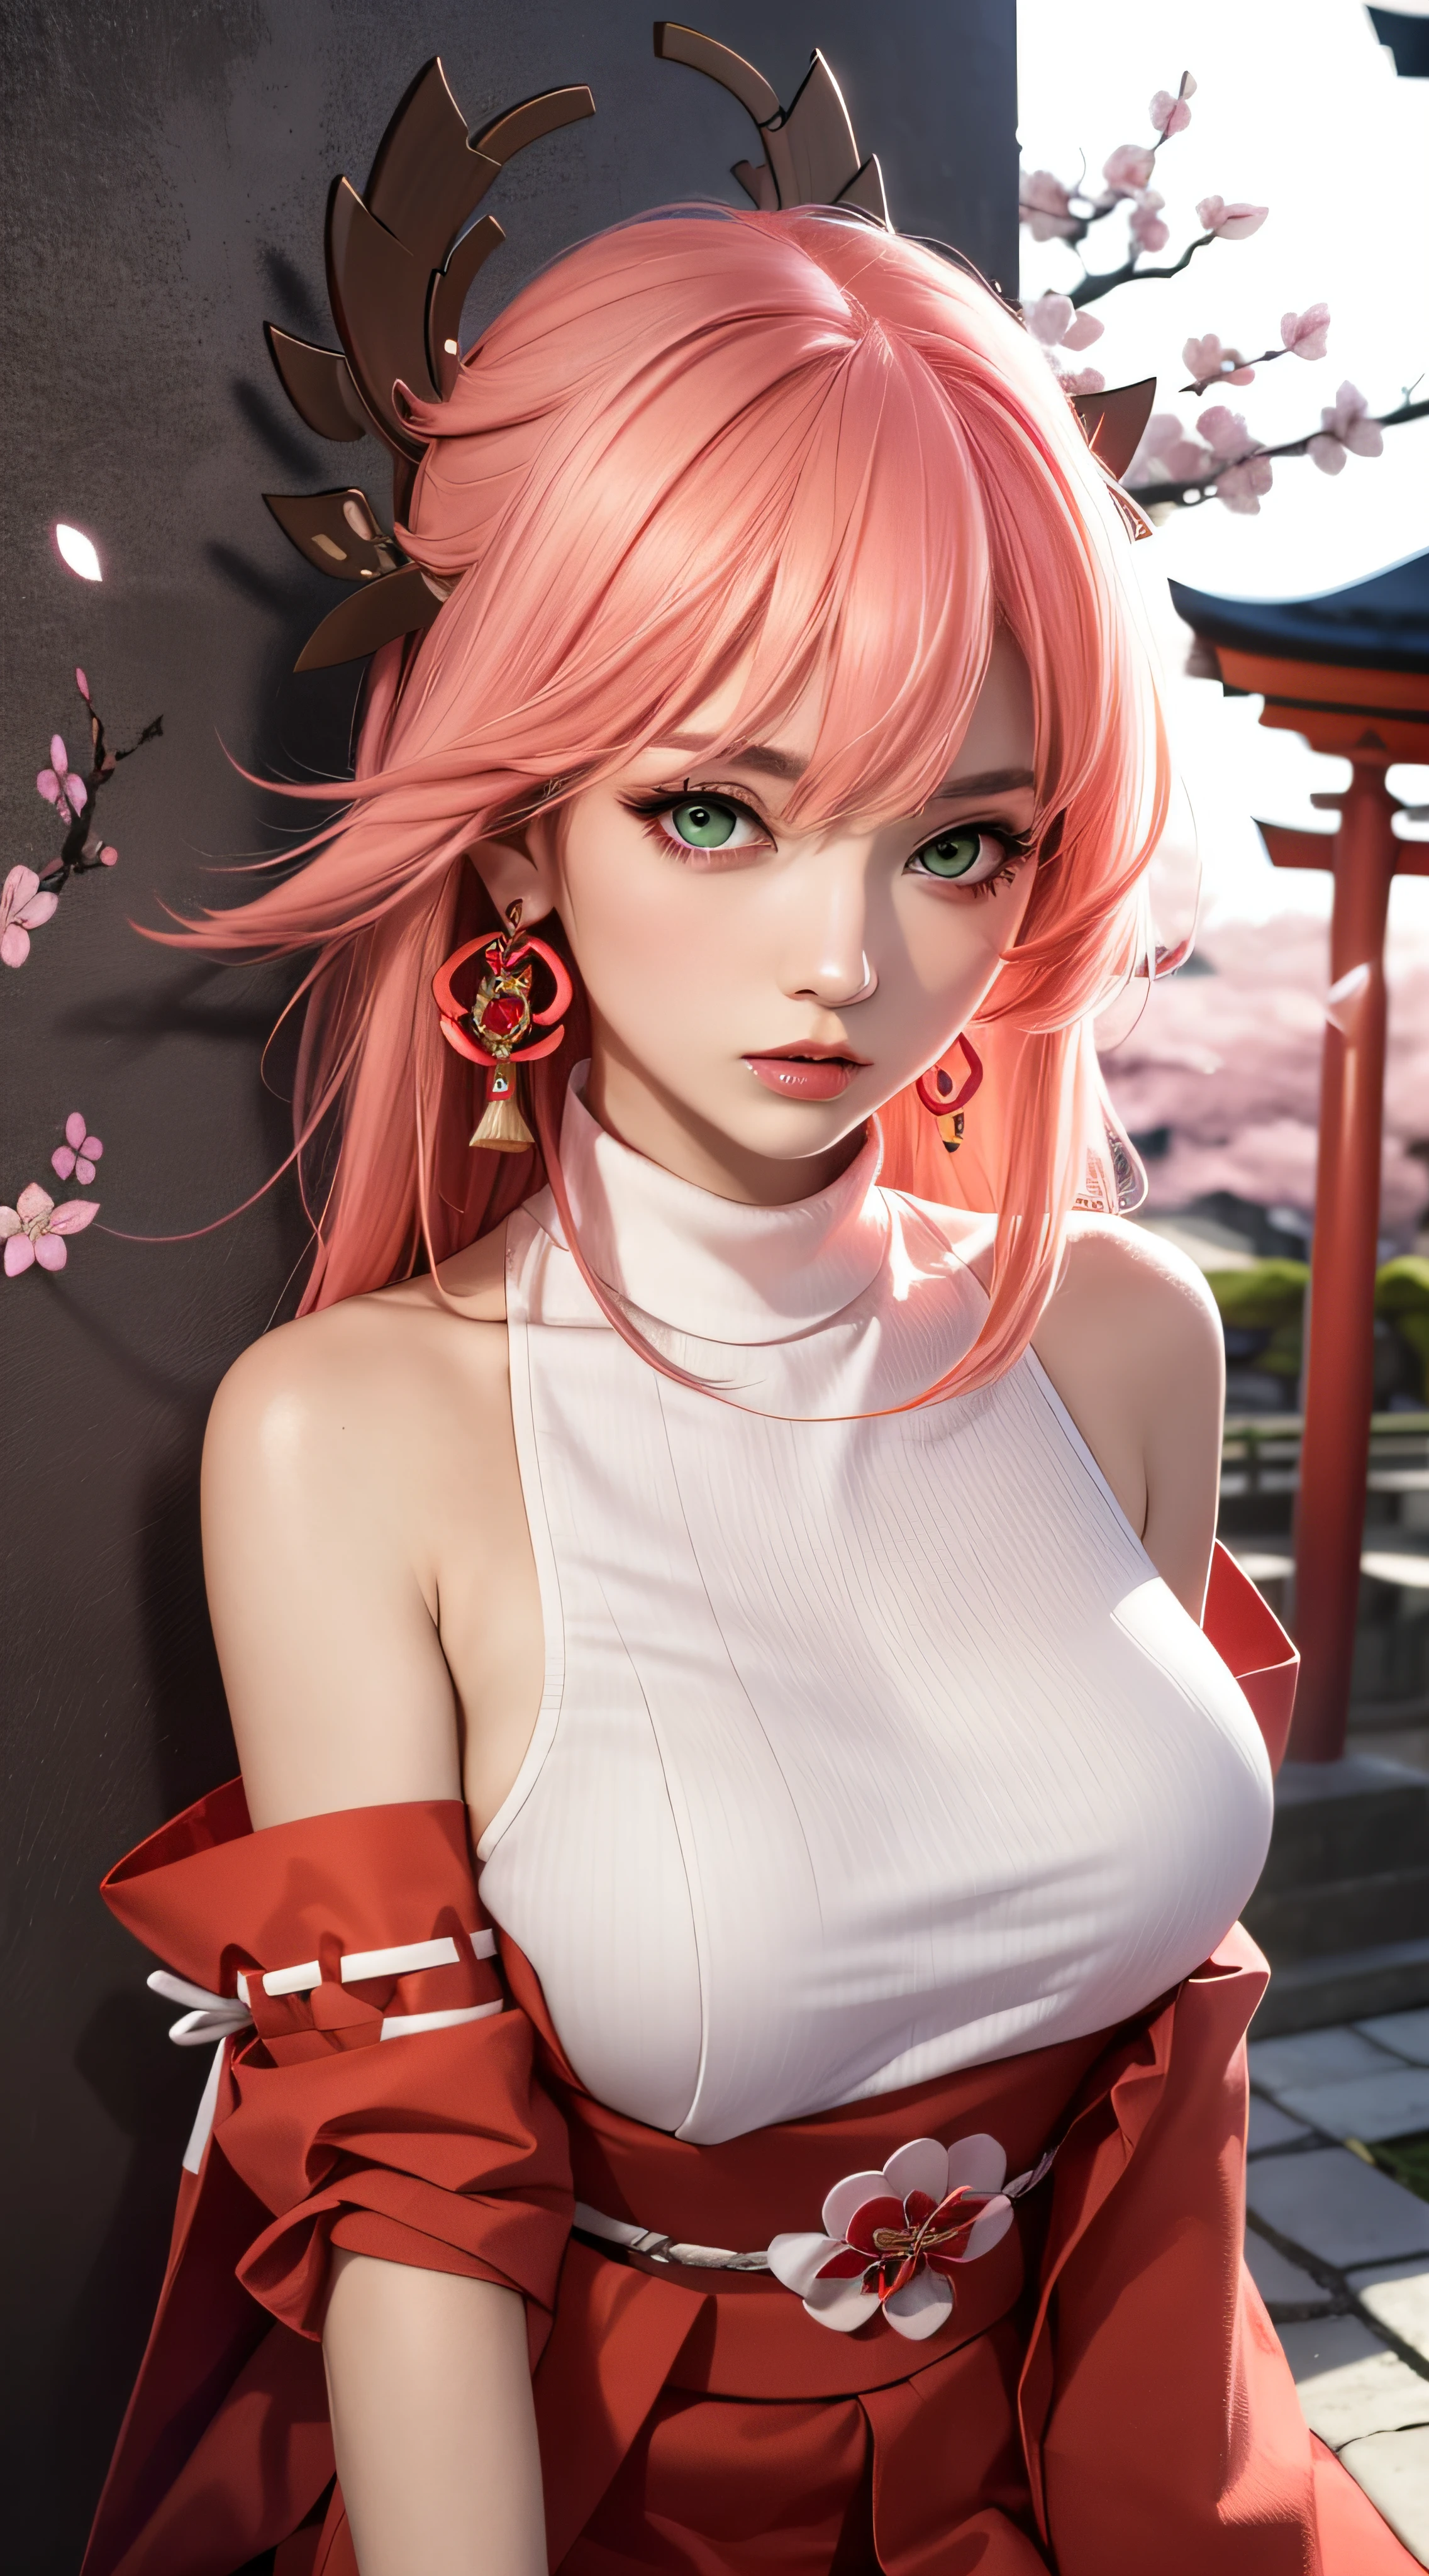 (Masterpiece, Excellent, 1girl, solo, complex details, color difference), realism, ((medium breath)), off-the-shoulders, big breasts, sexy, Yae Miko, long pink hair, red headdress, red highlight, hair above one eye, green eyes, earrings, sharp eyes, perfectly symmetrical figure, choker, neon shirt, open jacket, turtleneck sweater, against the wall, brick wall, graffiti, dim lighting, alley, looking at the audience, ((mean, seductive, charming)), ((cherry blossom background ))),((Japanese temple background)))), (((Glow-in-the-dark background)))